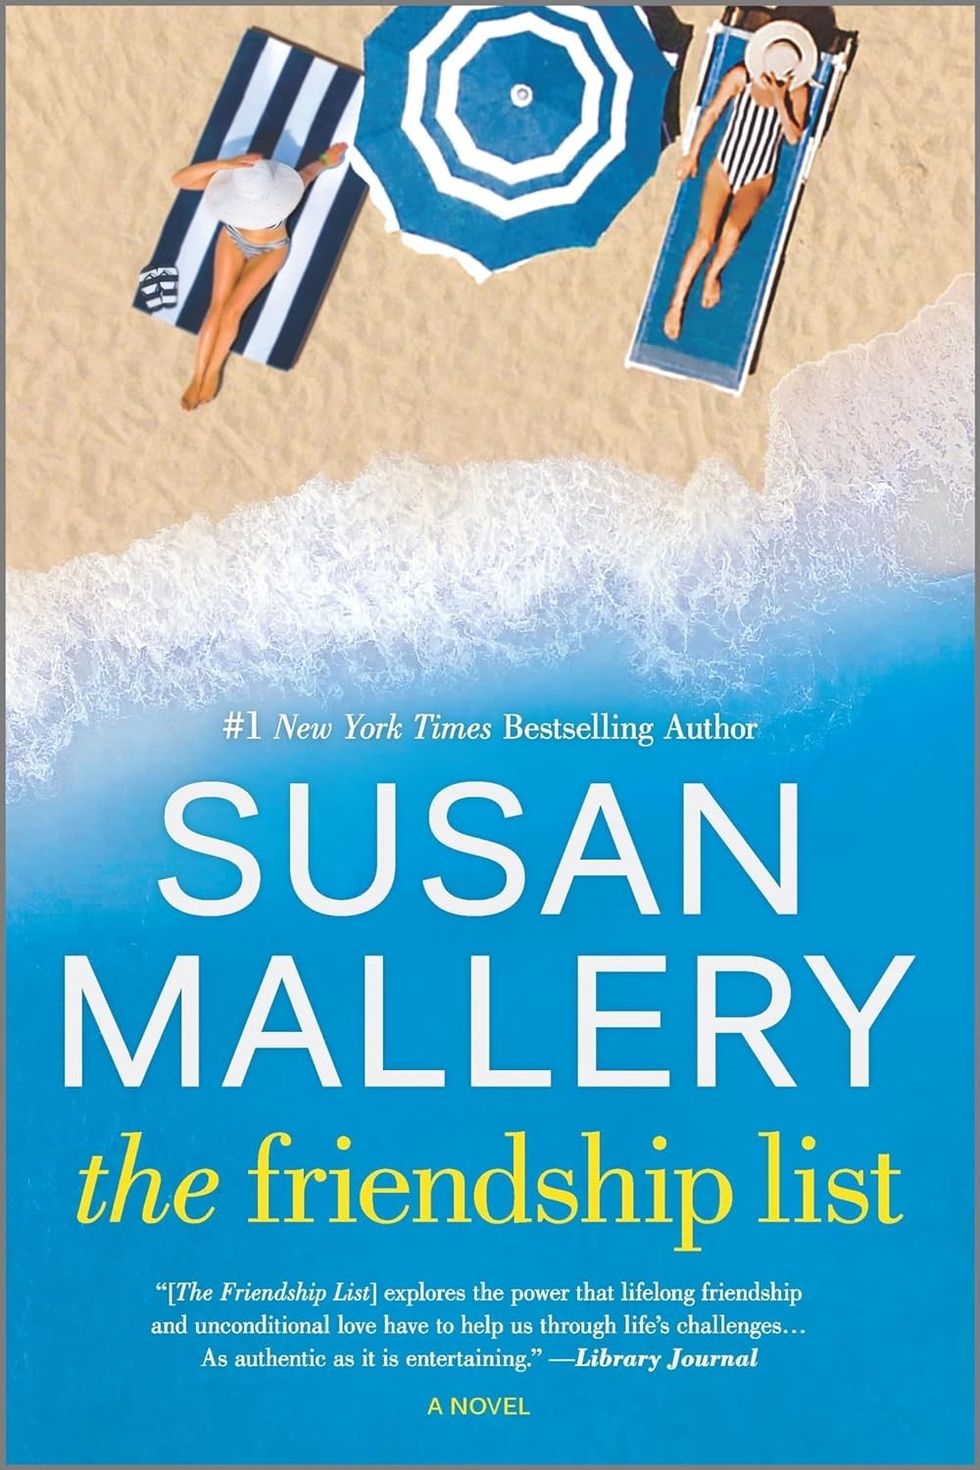 "The Friendship List" by Susan Mallery